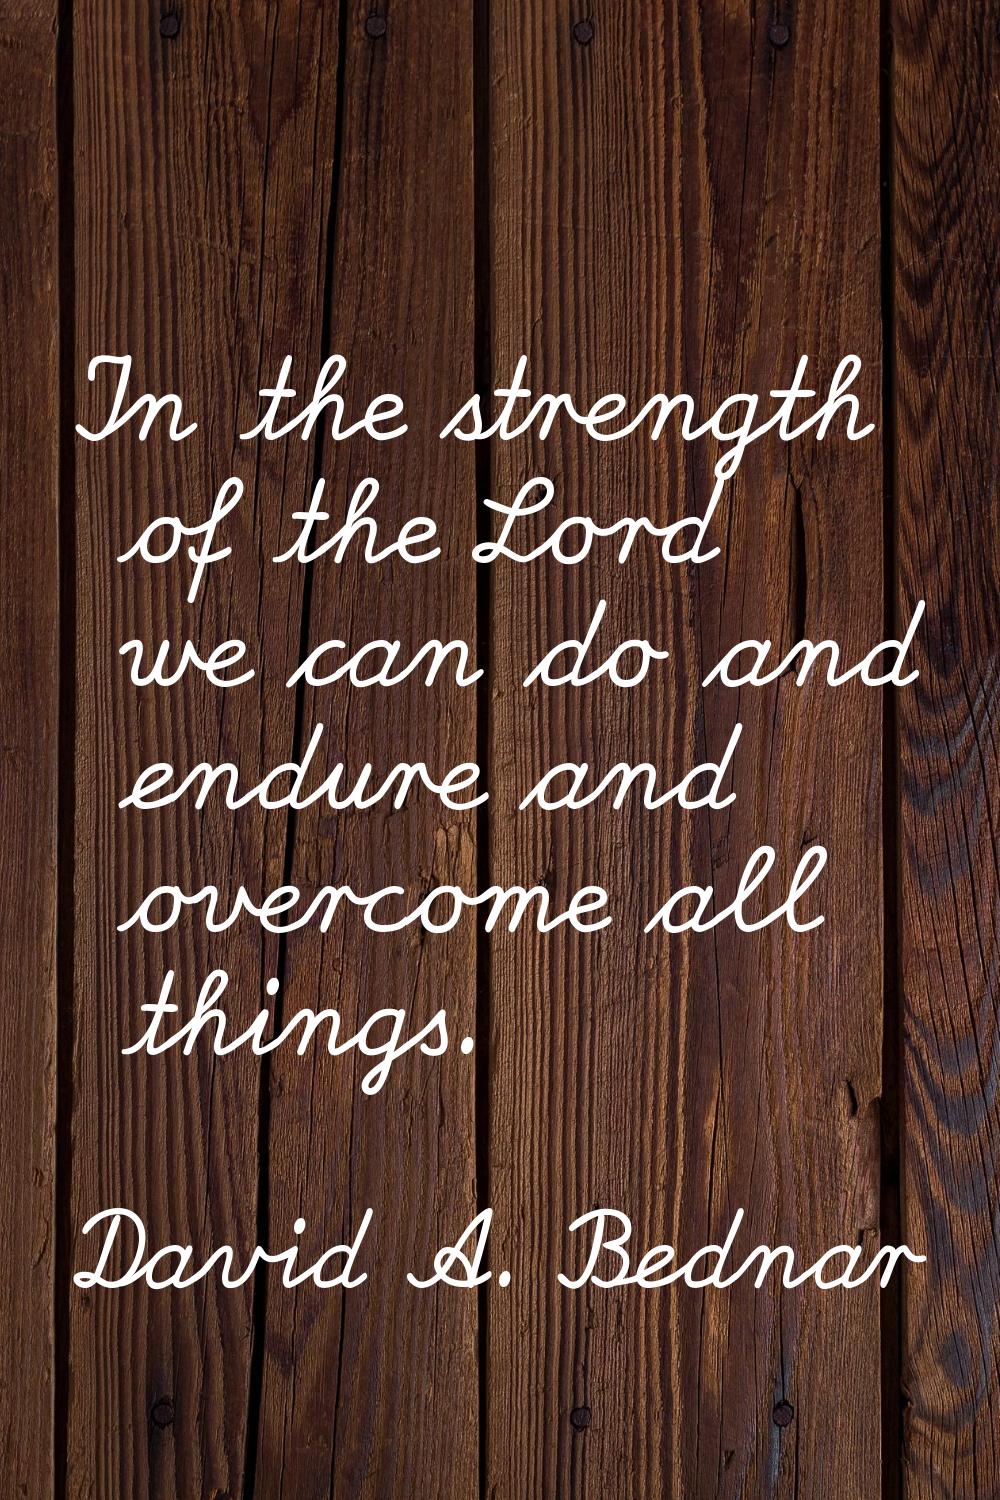 In the strength of the Lord we can do and endure and overcome all things.